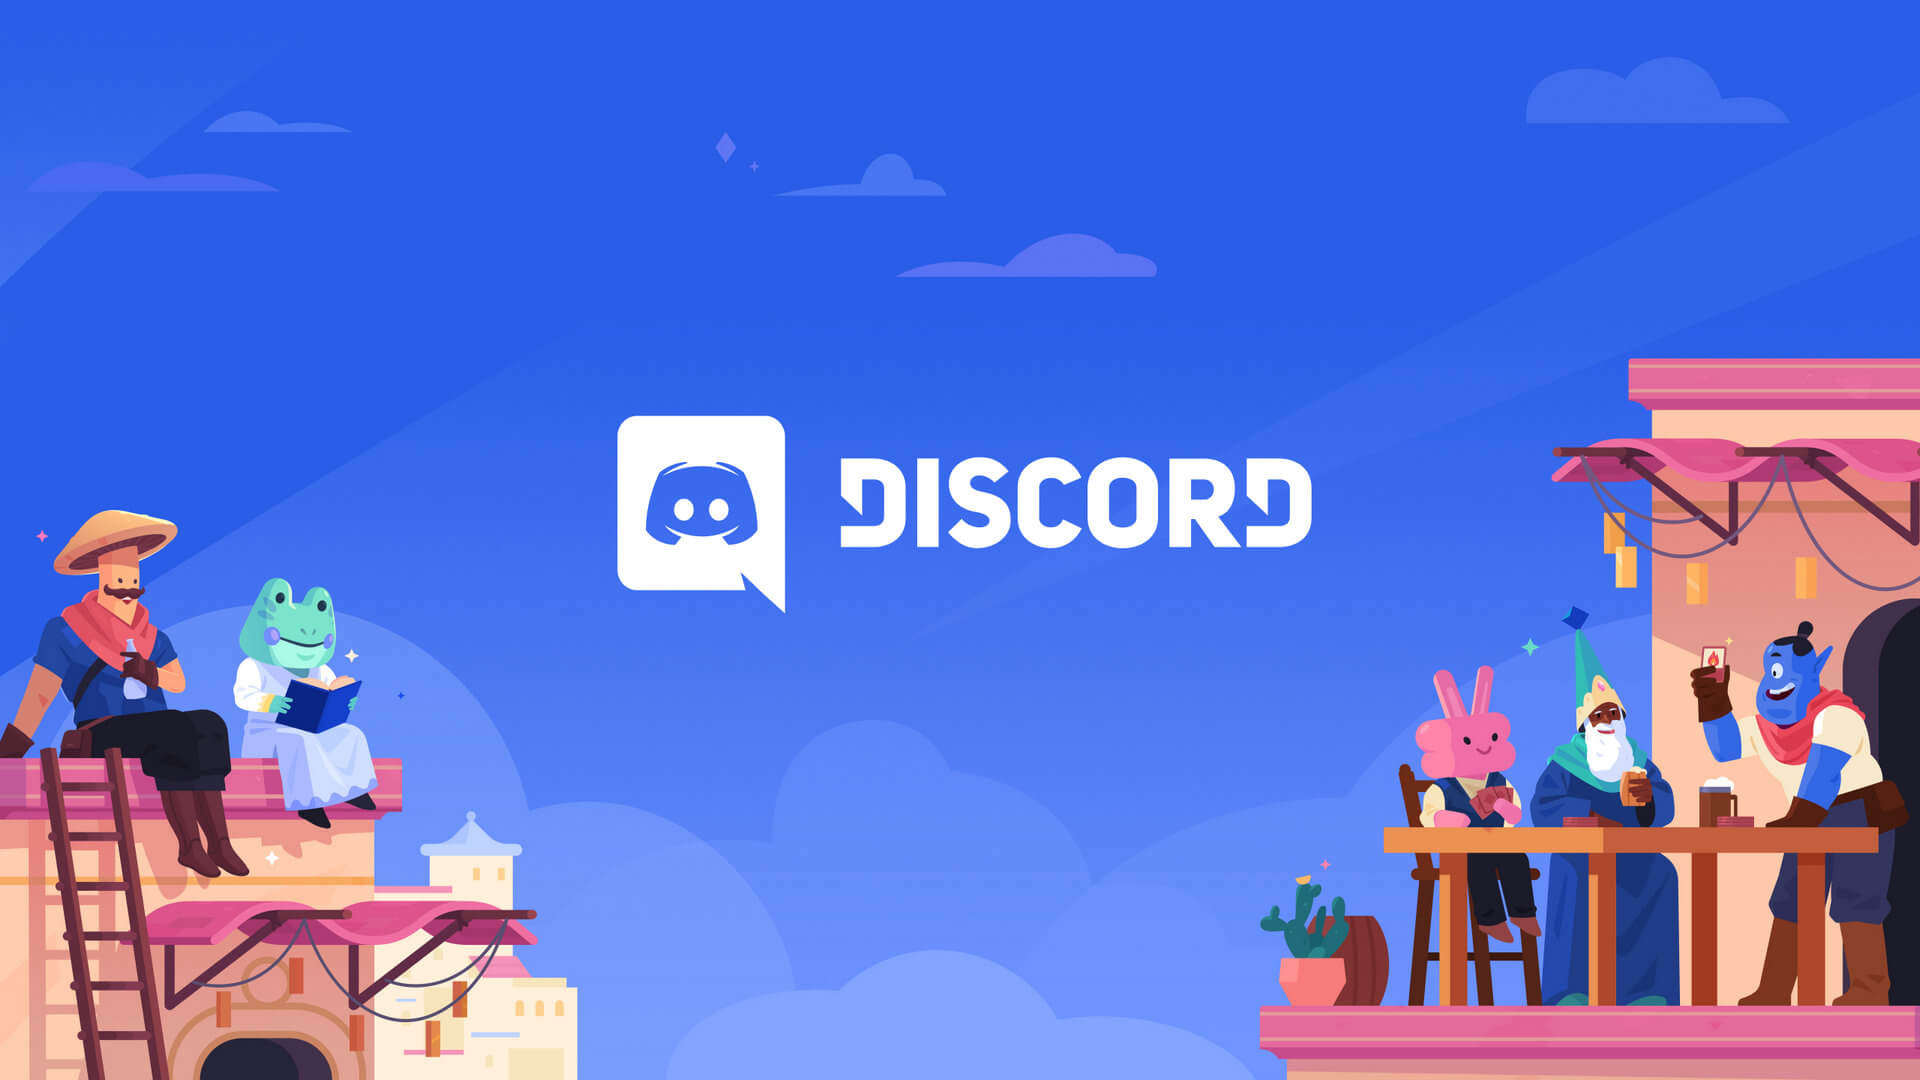 discord-restored-after-widespread-outage